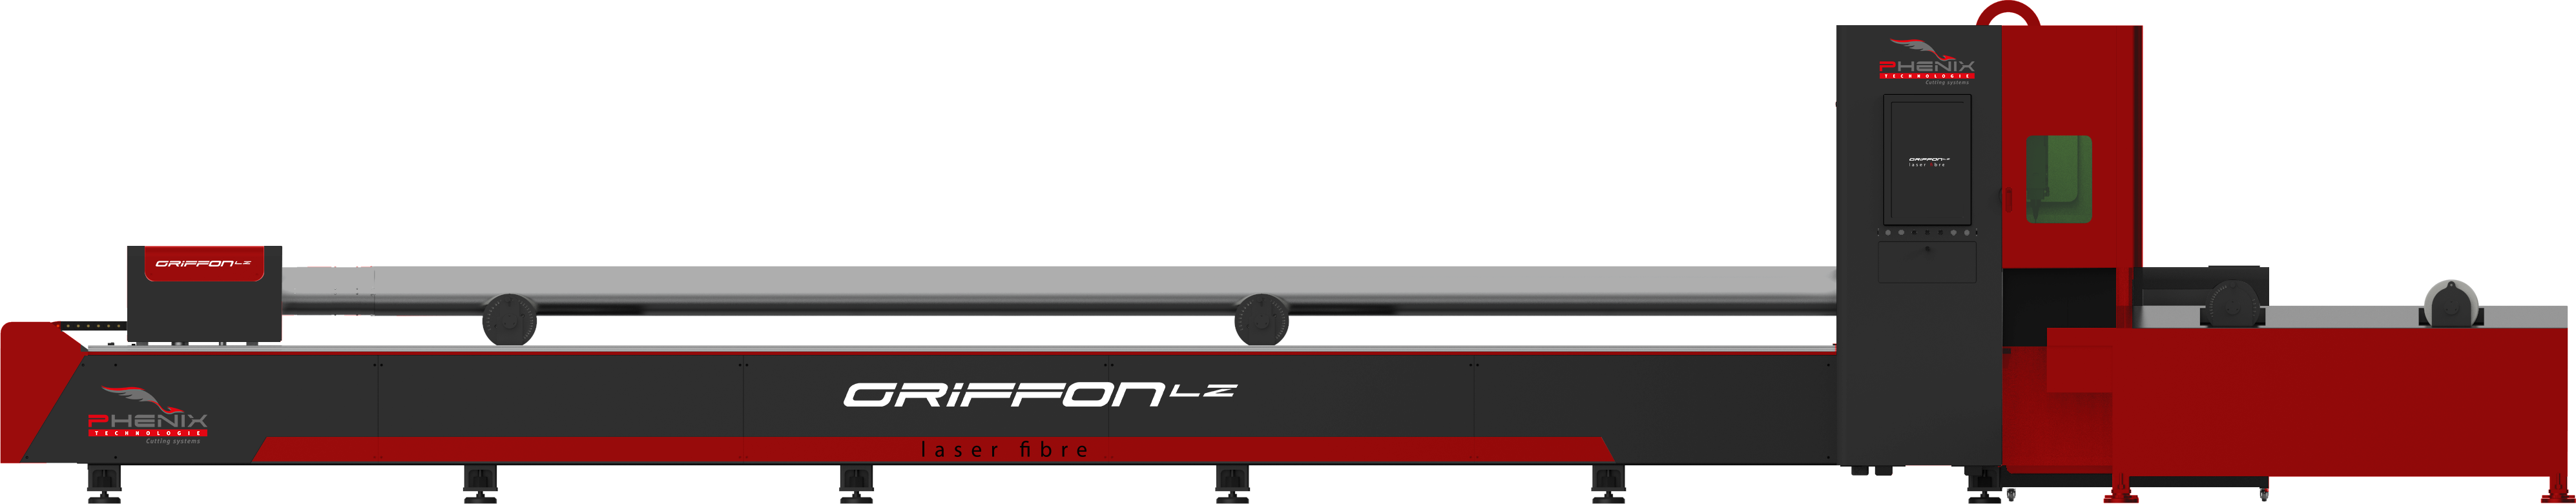 griffon_lz-front side-HD.png